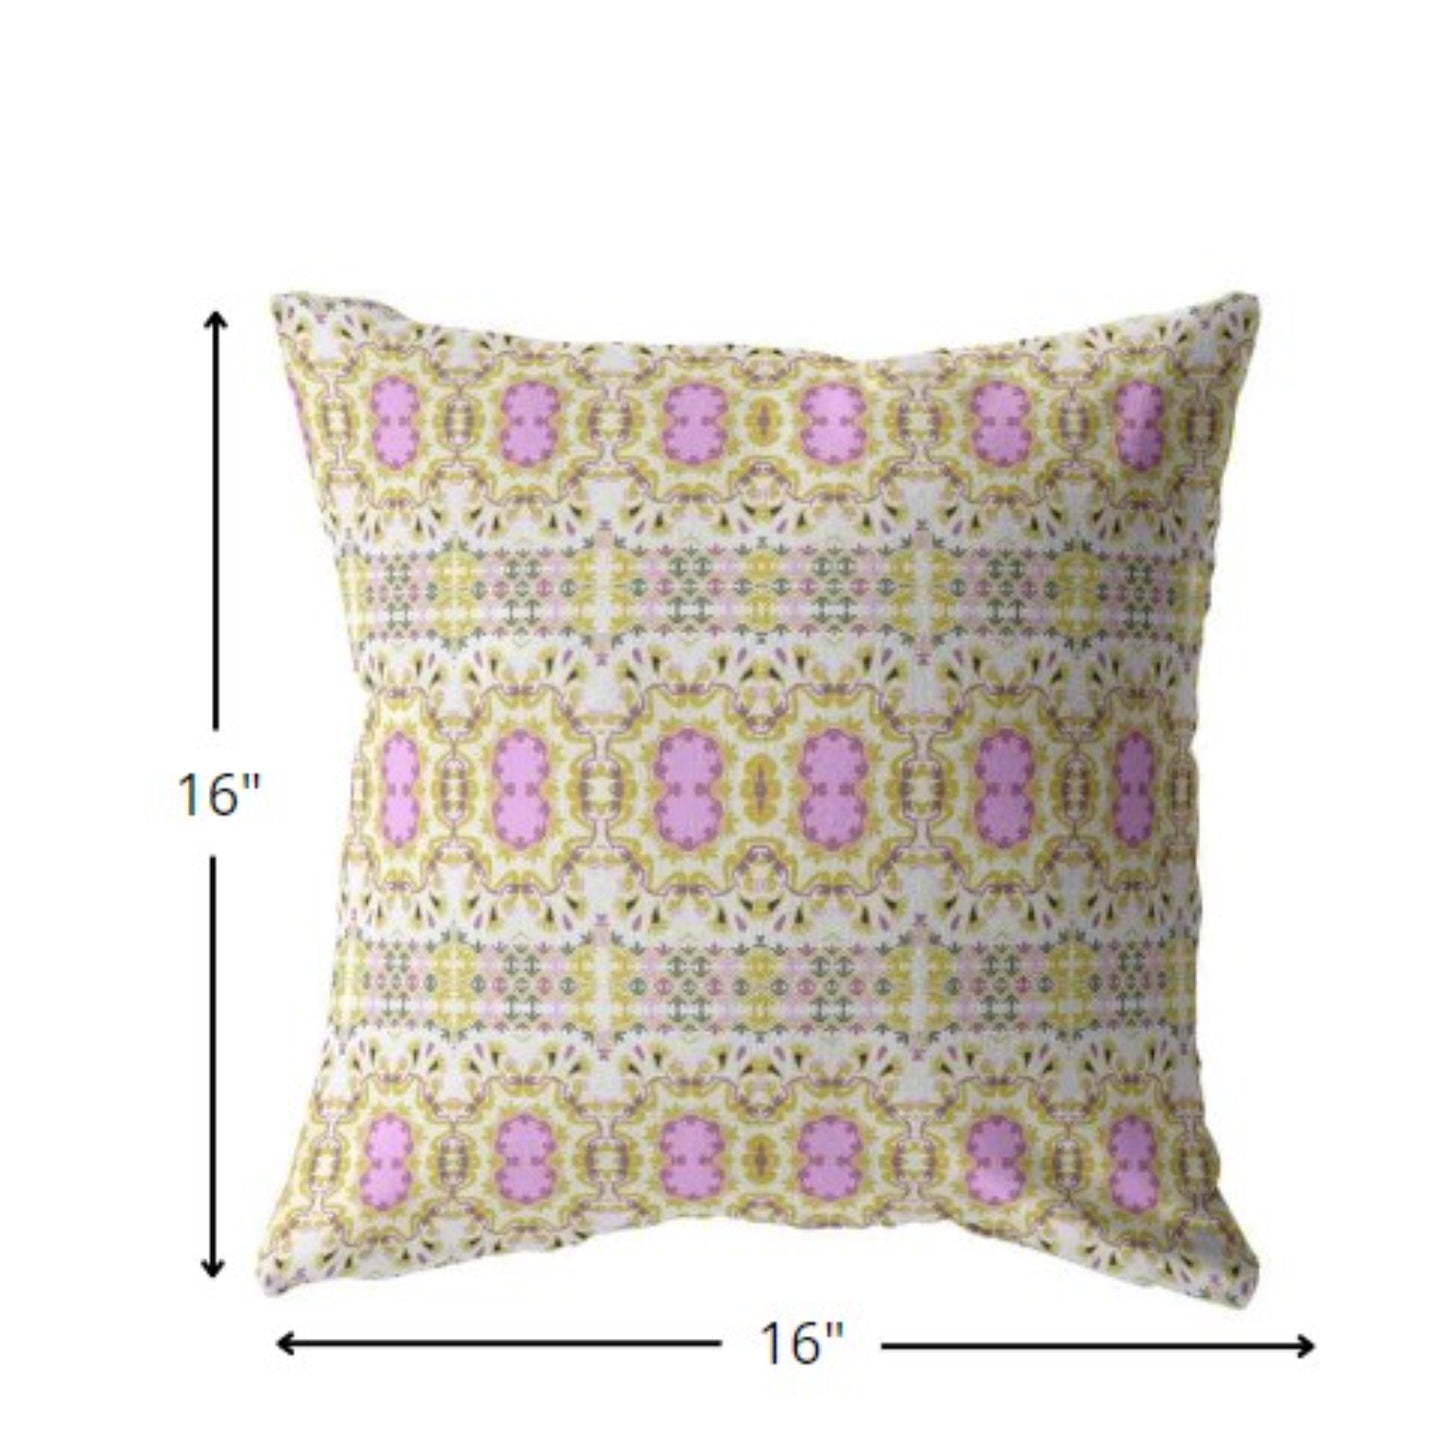 16” Yellow Lavender Geofloral Zippered Suede Throw Pillow